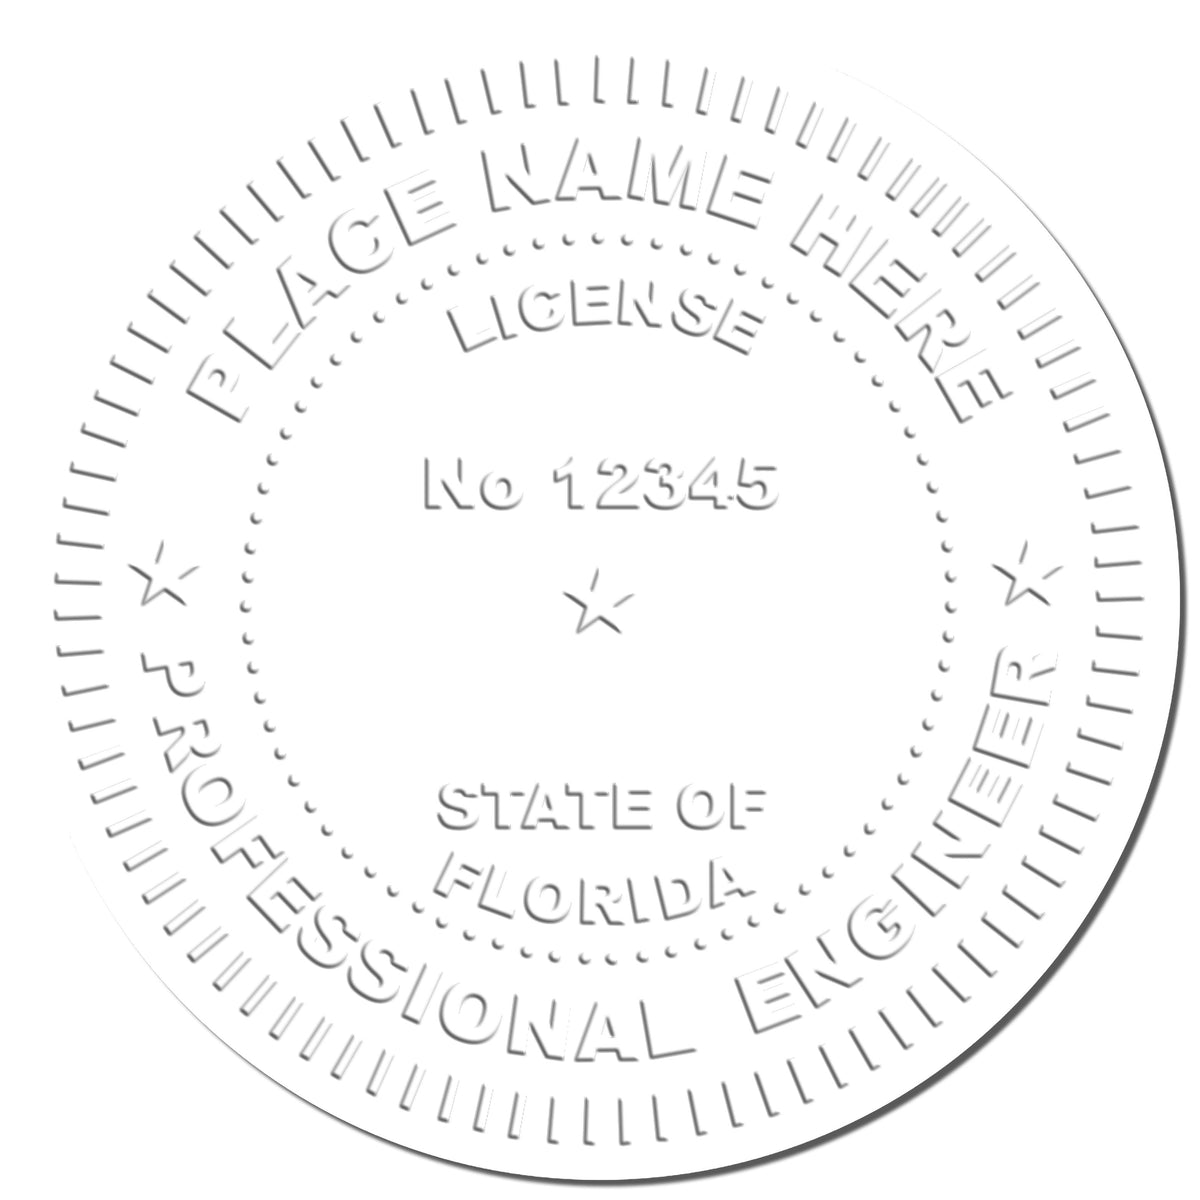 This paper is stamped with a sample imprint of the Hybrid Florida Engineer Seal, signifying its quality and reliability.